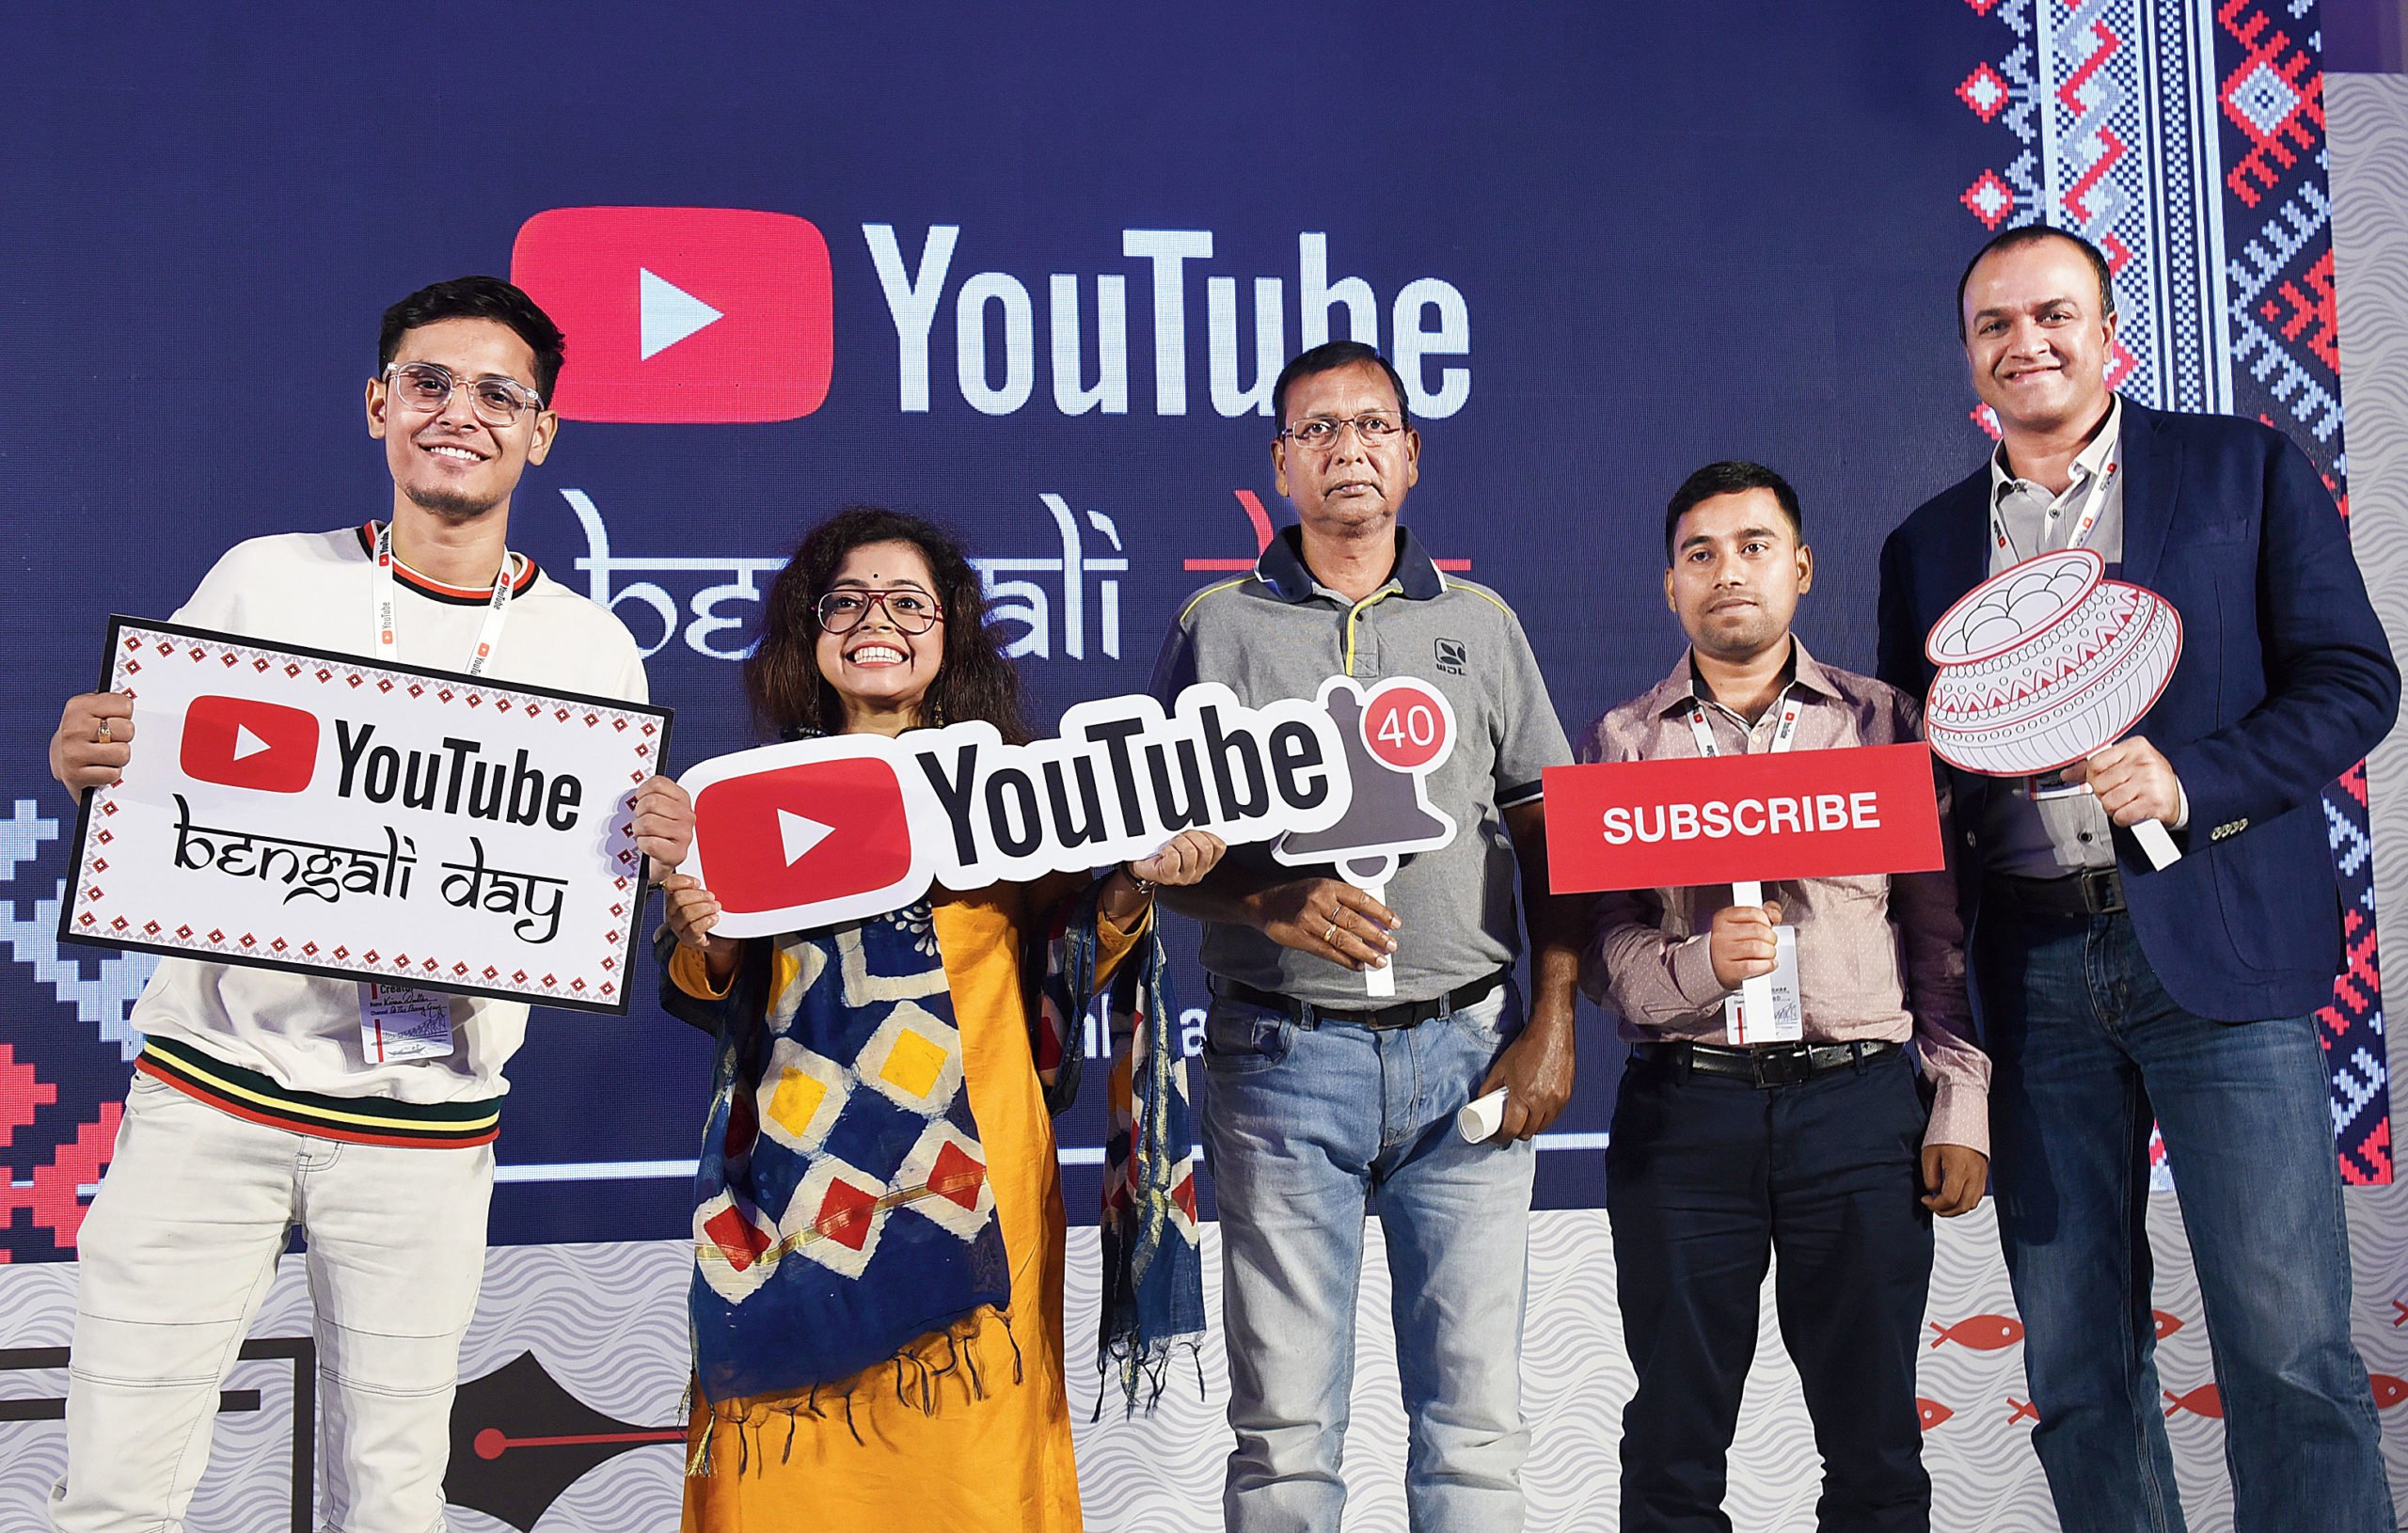 Here Are 7 Bengali Youtubers Who Are Making A Name For Themselves